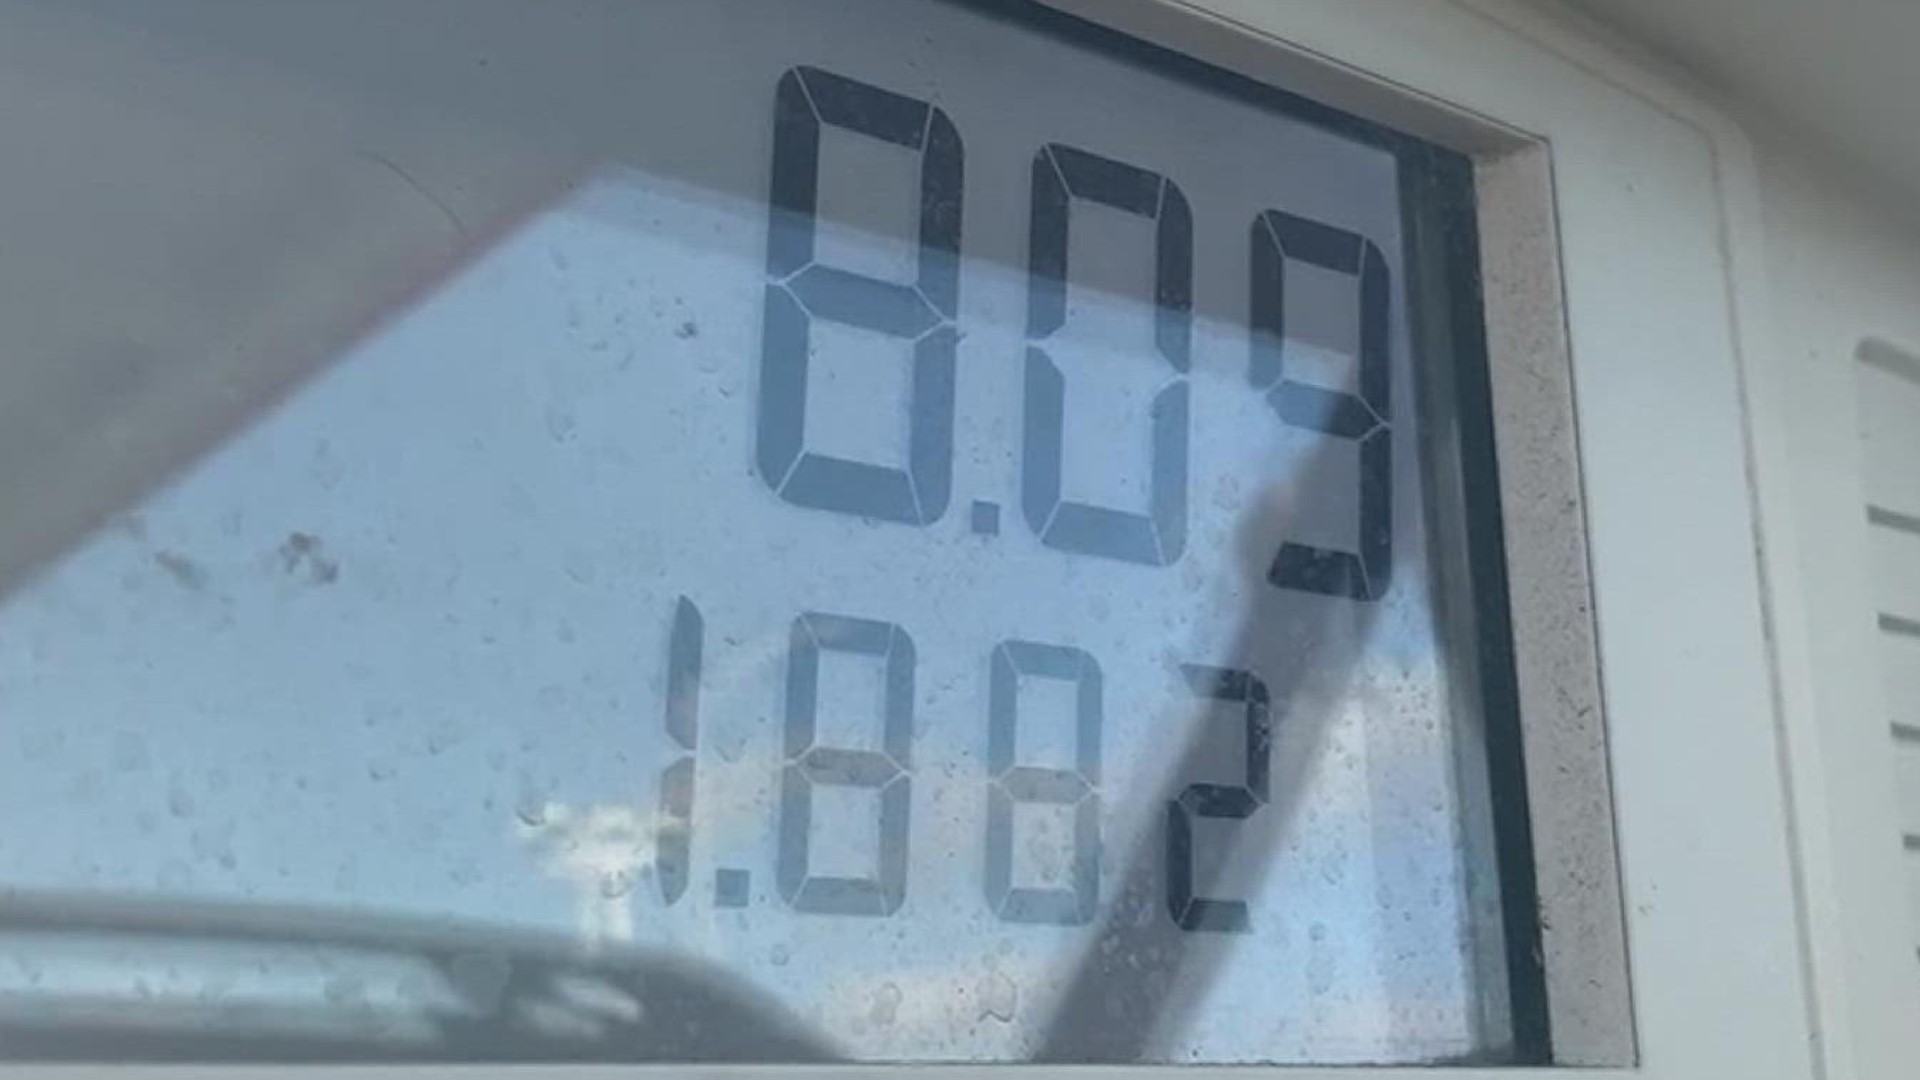 Several questions and frustrations come to mind when we pump gas, when will the prices go down? Why are they up again? Here's what experts say.